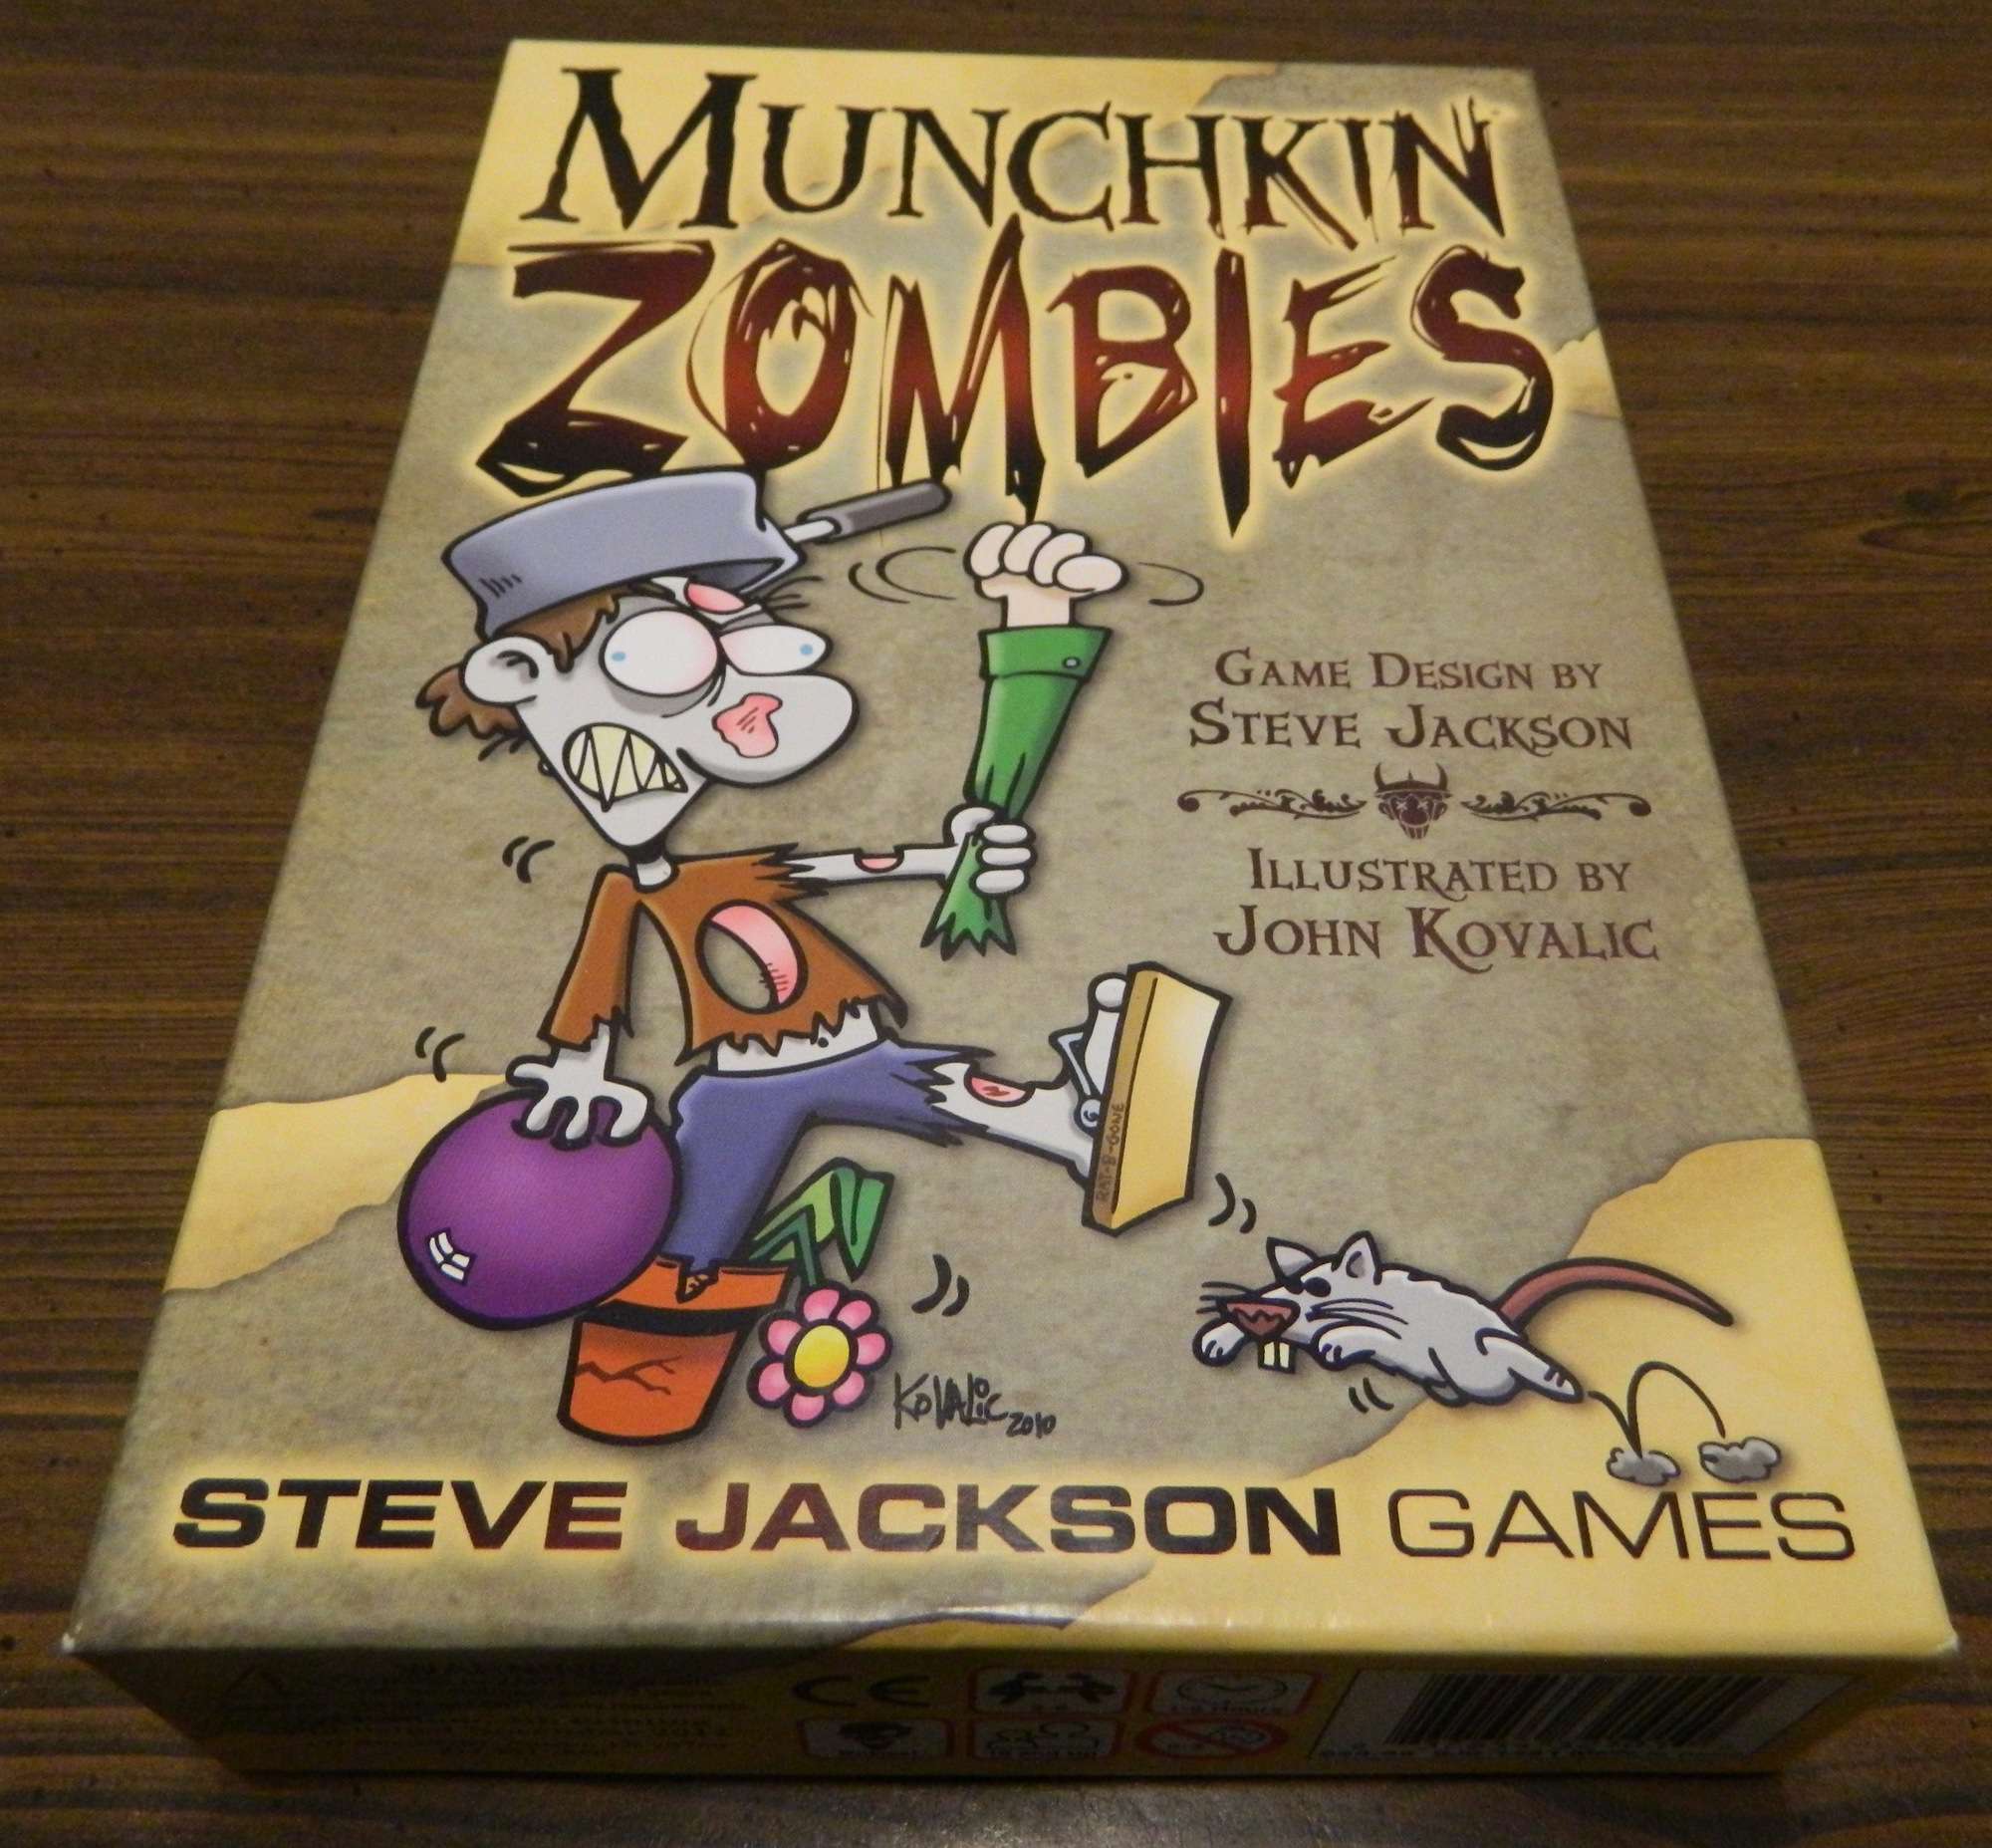 Munchkin Zombies Card Game Review and Instructions